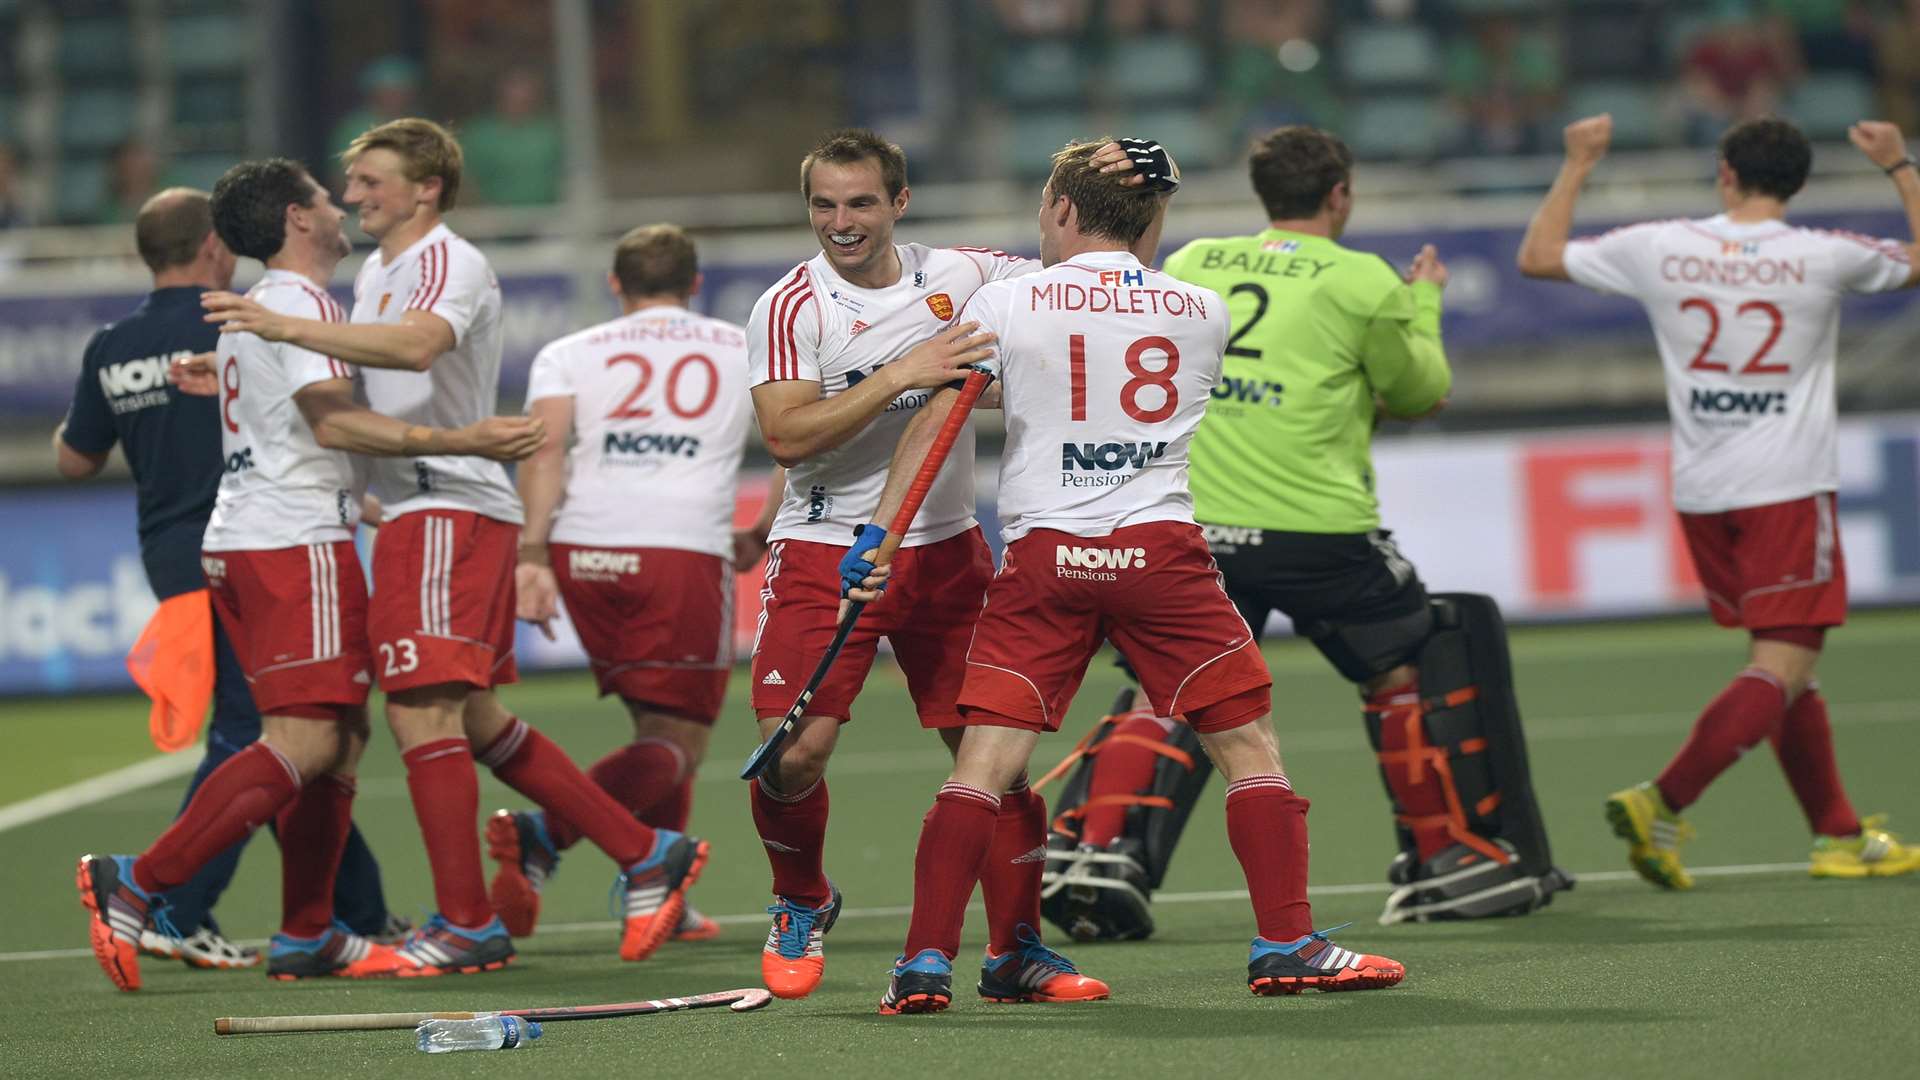 England celebrate their win over Belgium which saw them progress into the World Cup semi-final. Picture: Ady Kerry/ England Hockey